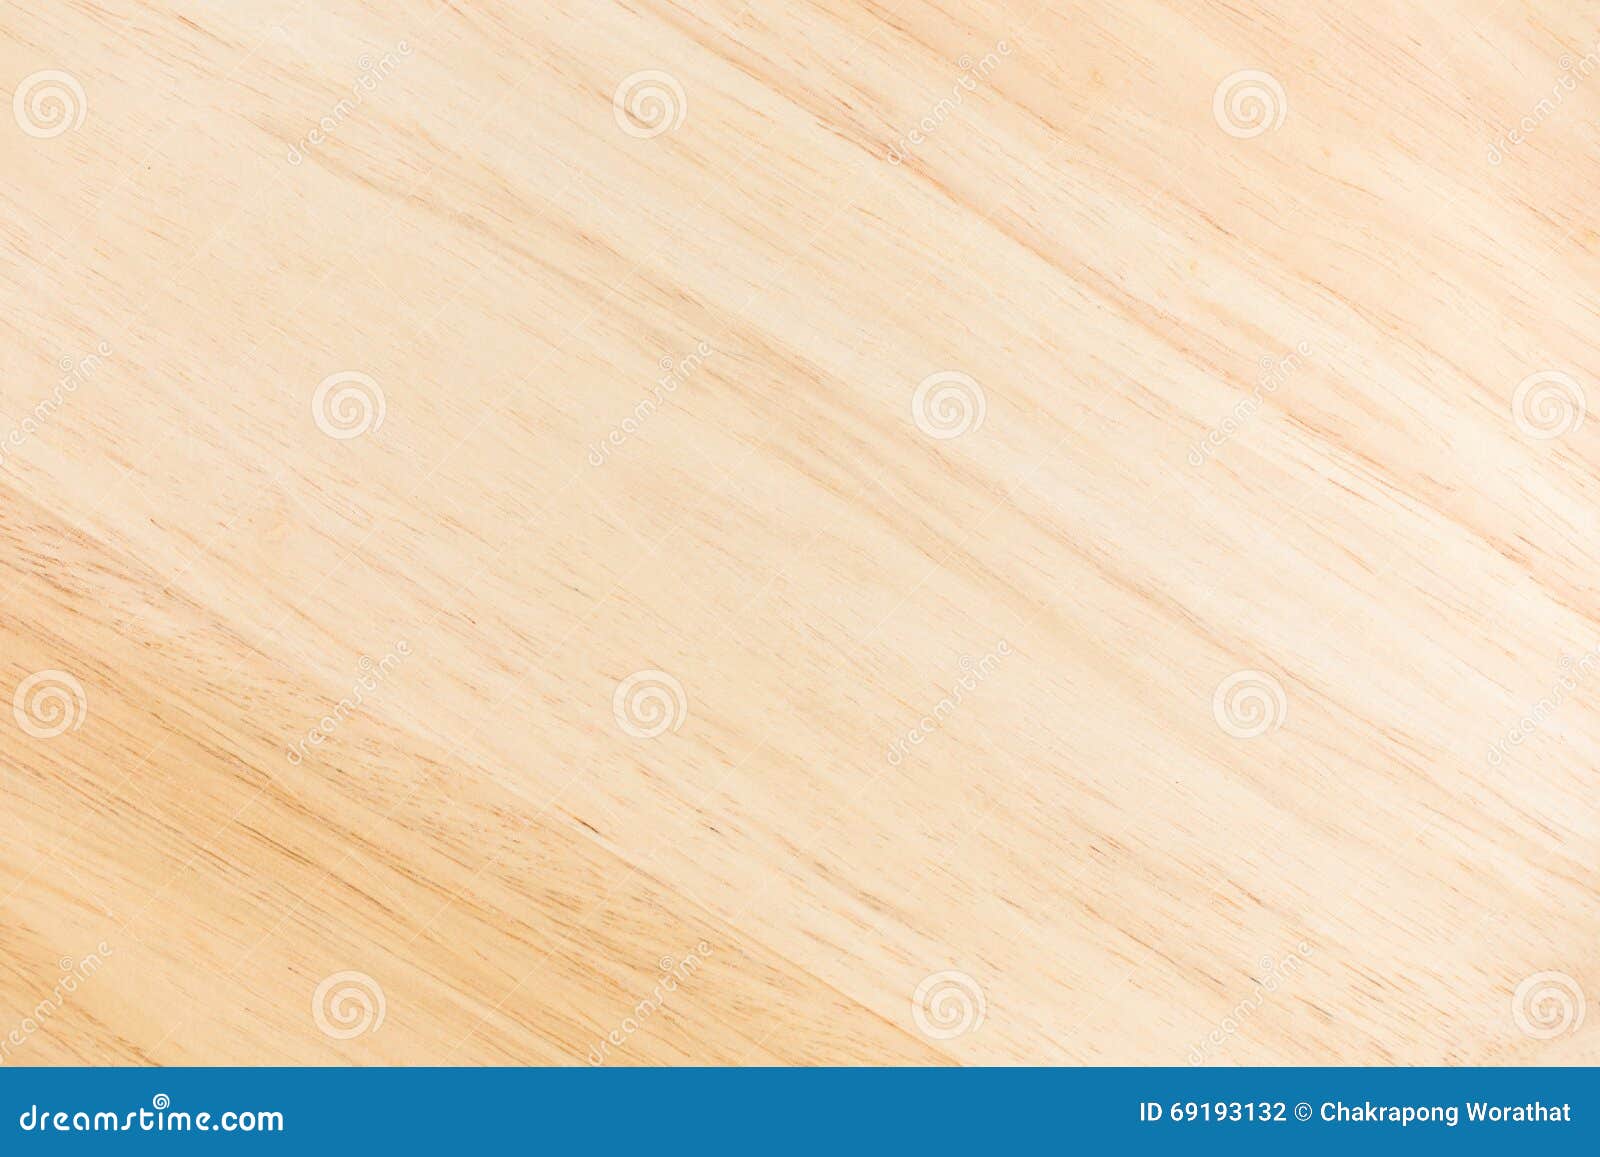 wooden bright ply wood on background texture.